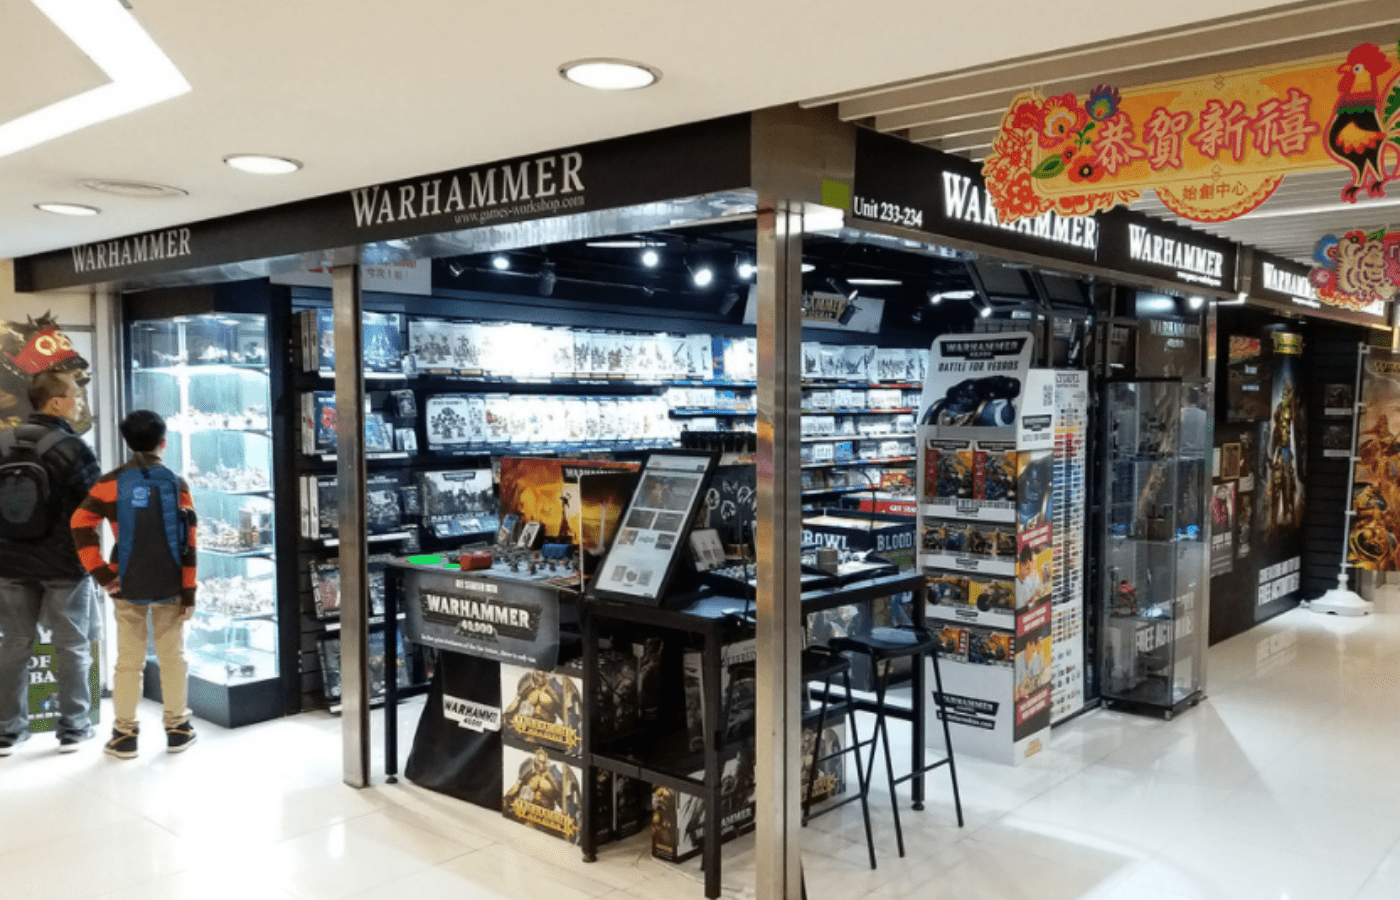 How to Become a Games WorkshopWarhammer Retailer